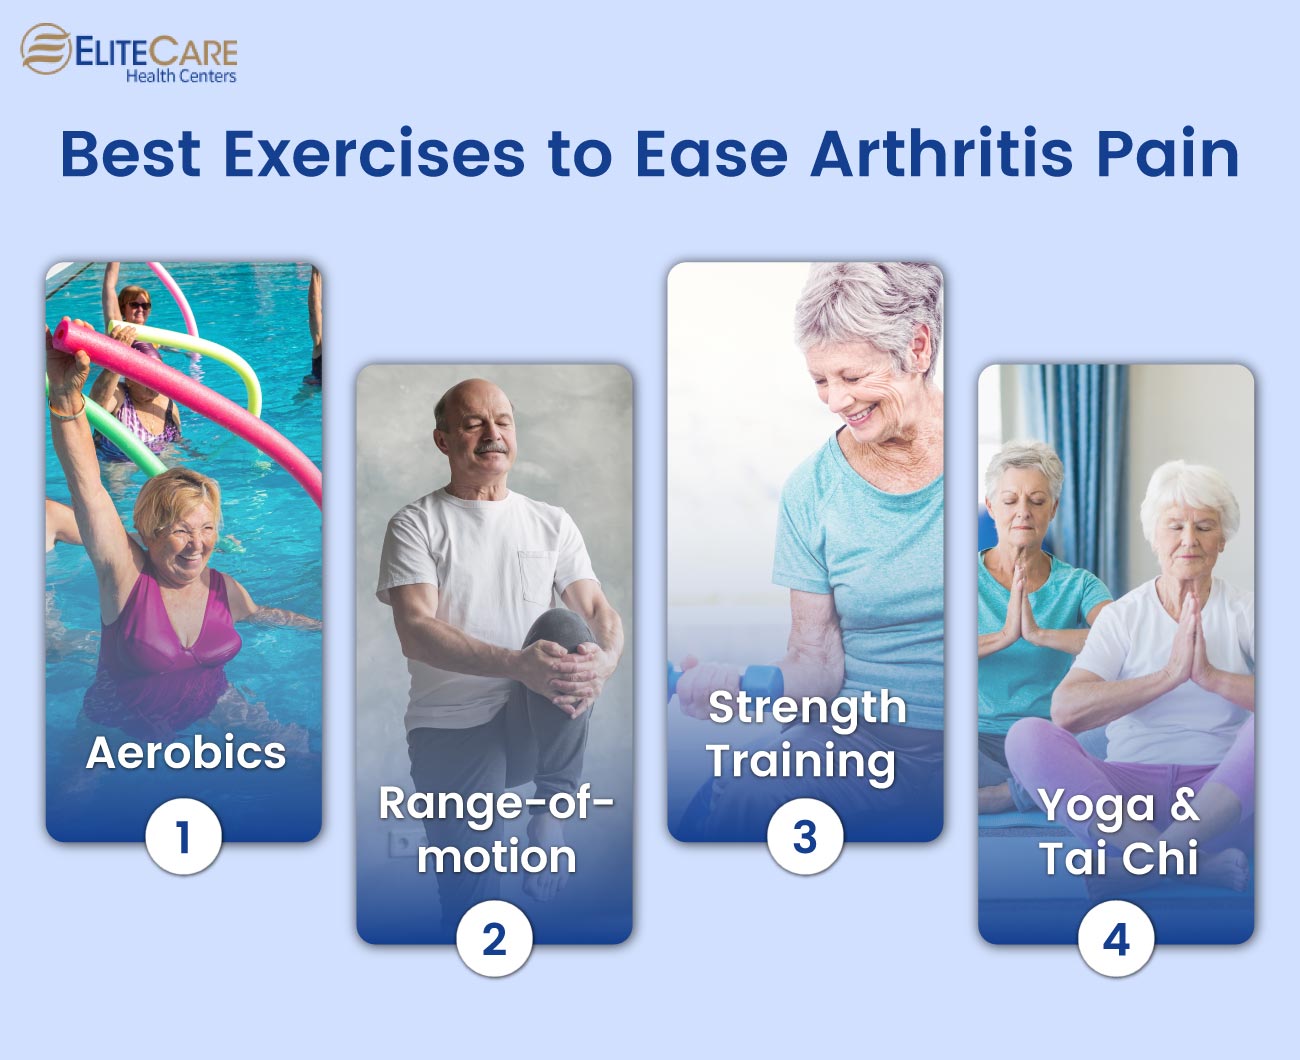 Best Exercises to Ease Arthritis Pain